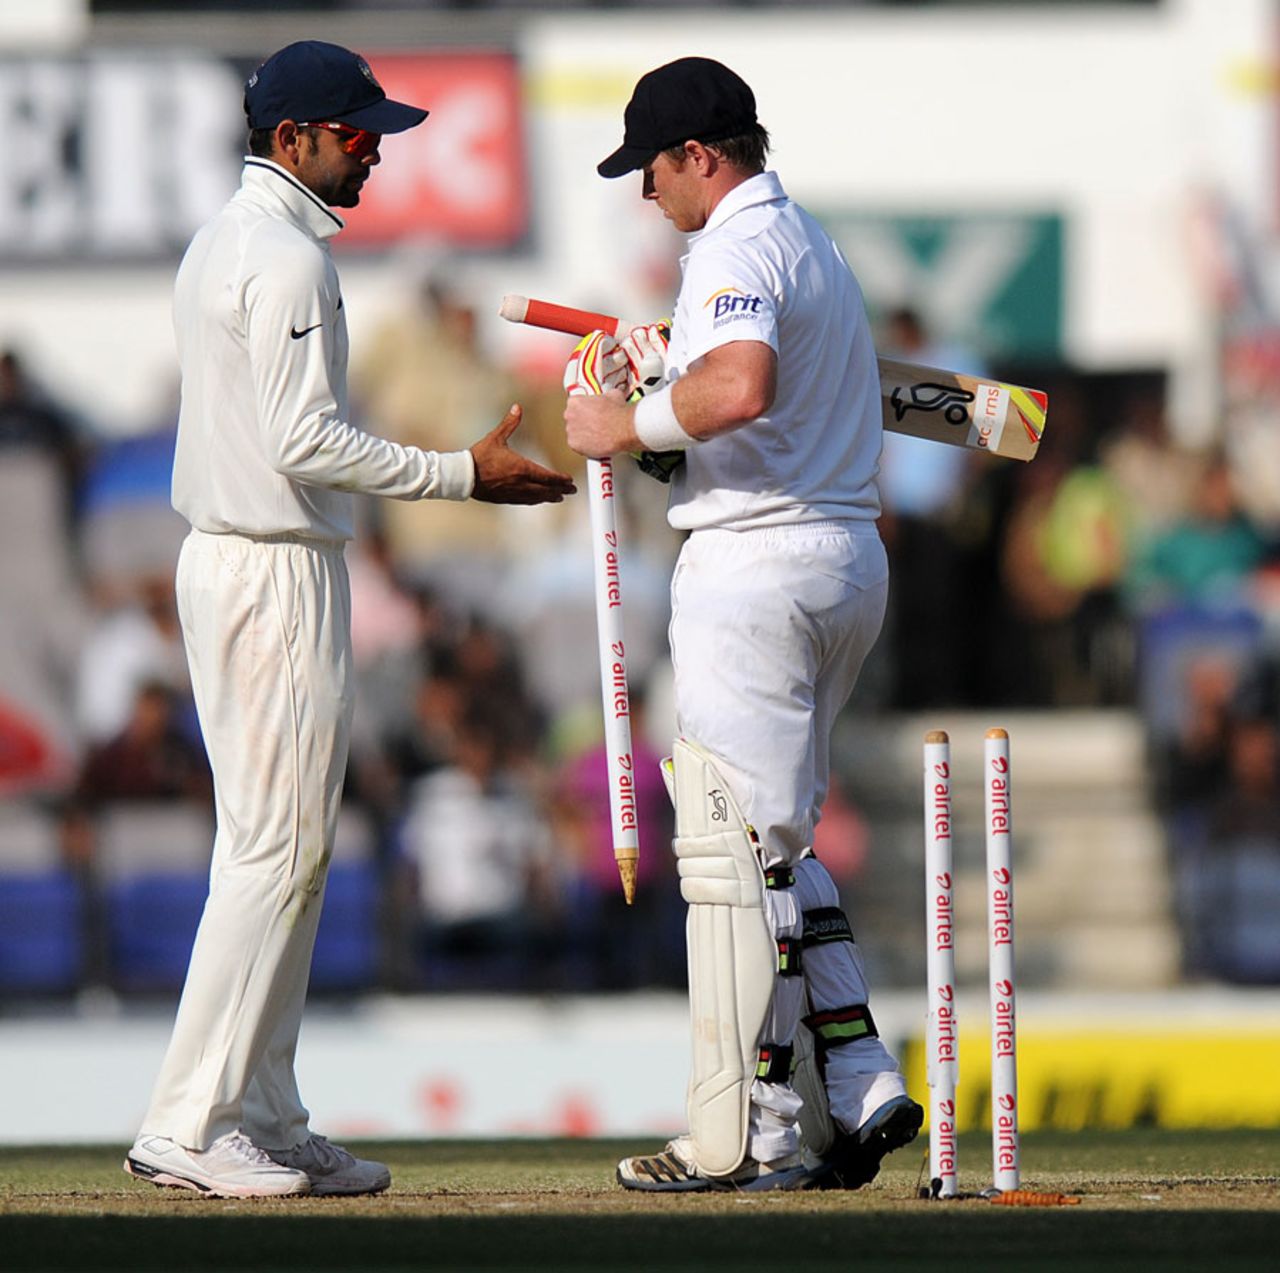 Virat Kohli offers his hand in congratulations, India v England, 4th Test, Nagpur, 5th day, December 17, 2012